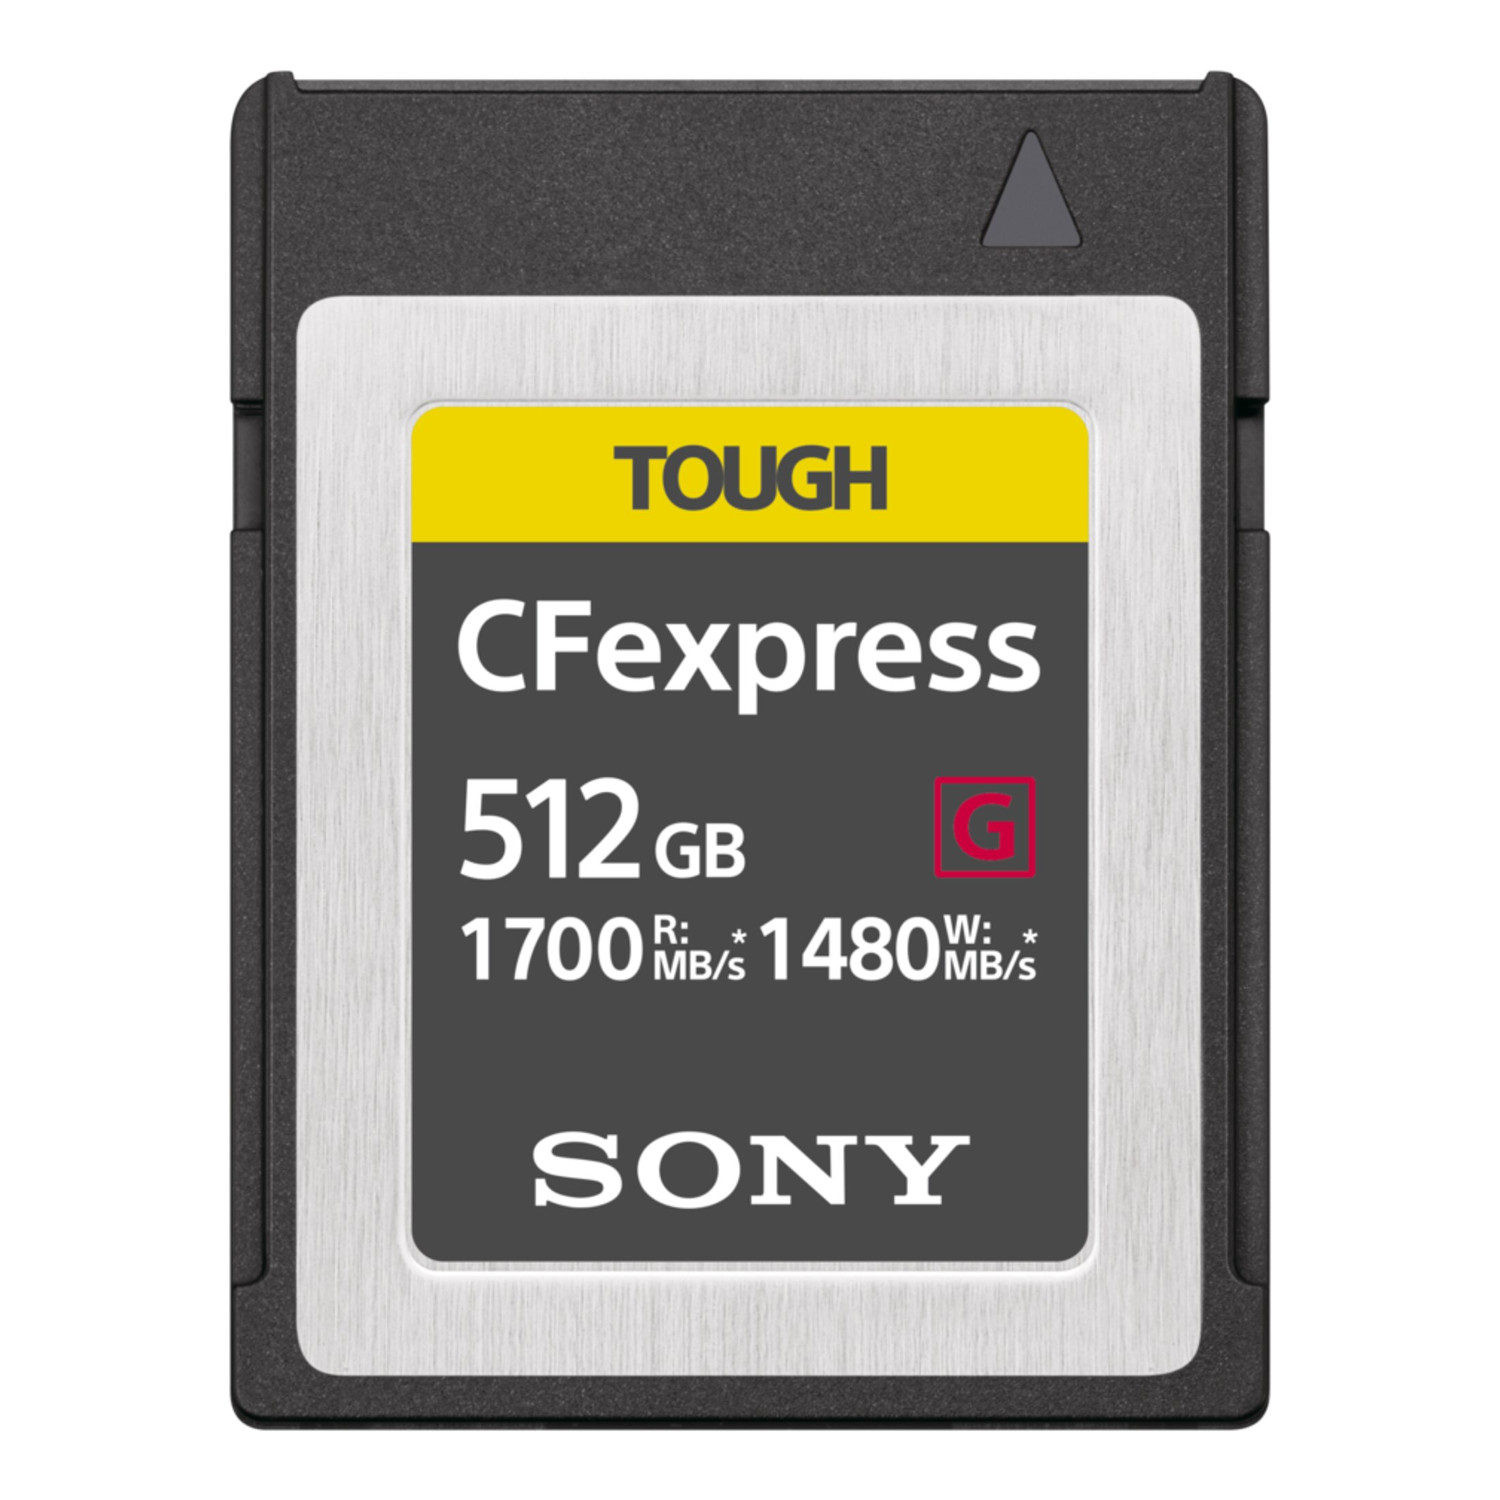 Sony 512GB Tough CFexpress Type B 1700MB/s geheugenkaart